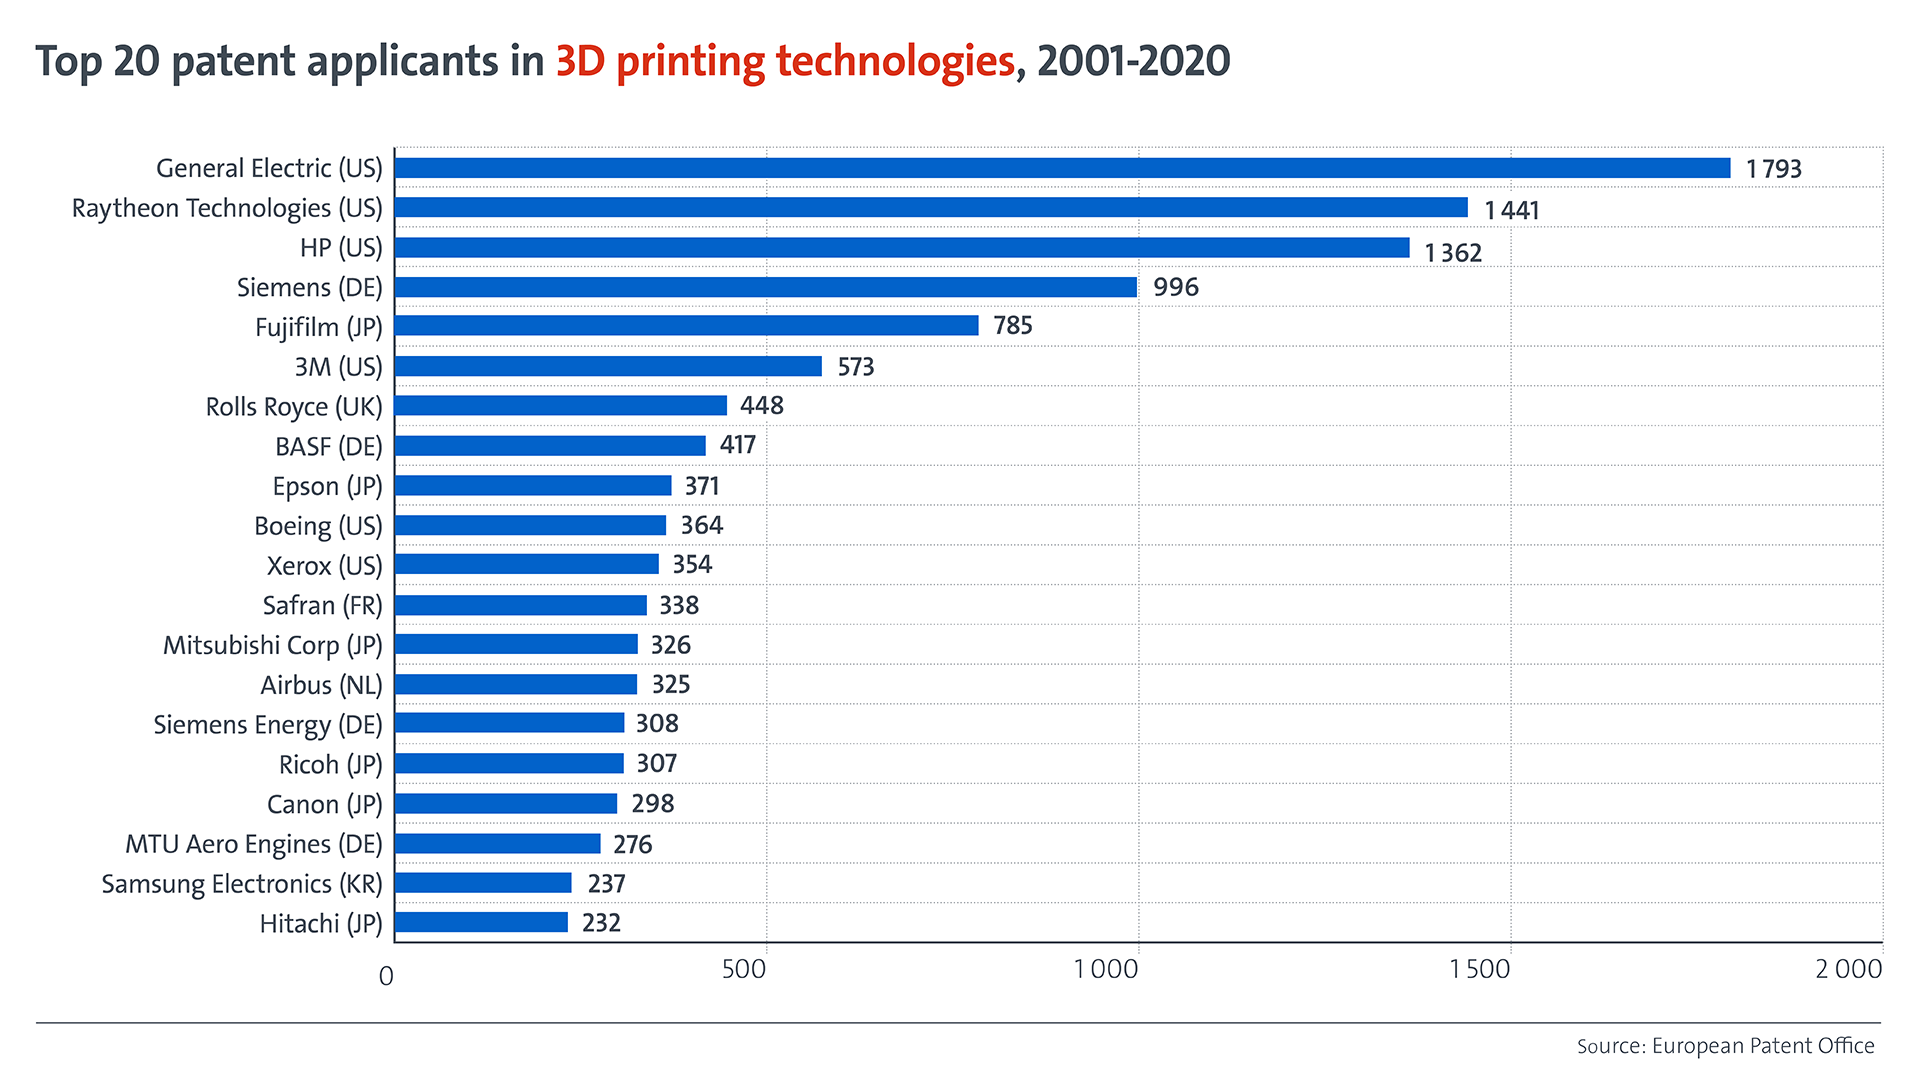 Top 20 patent applicants in 3D printing technologies